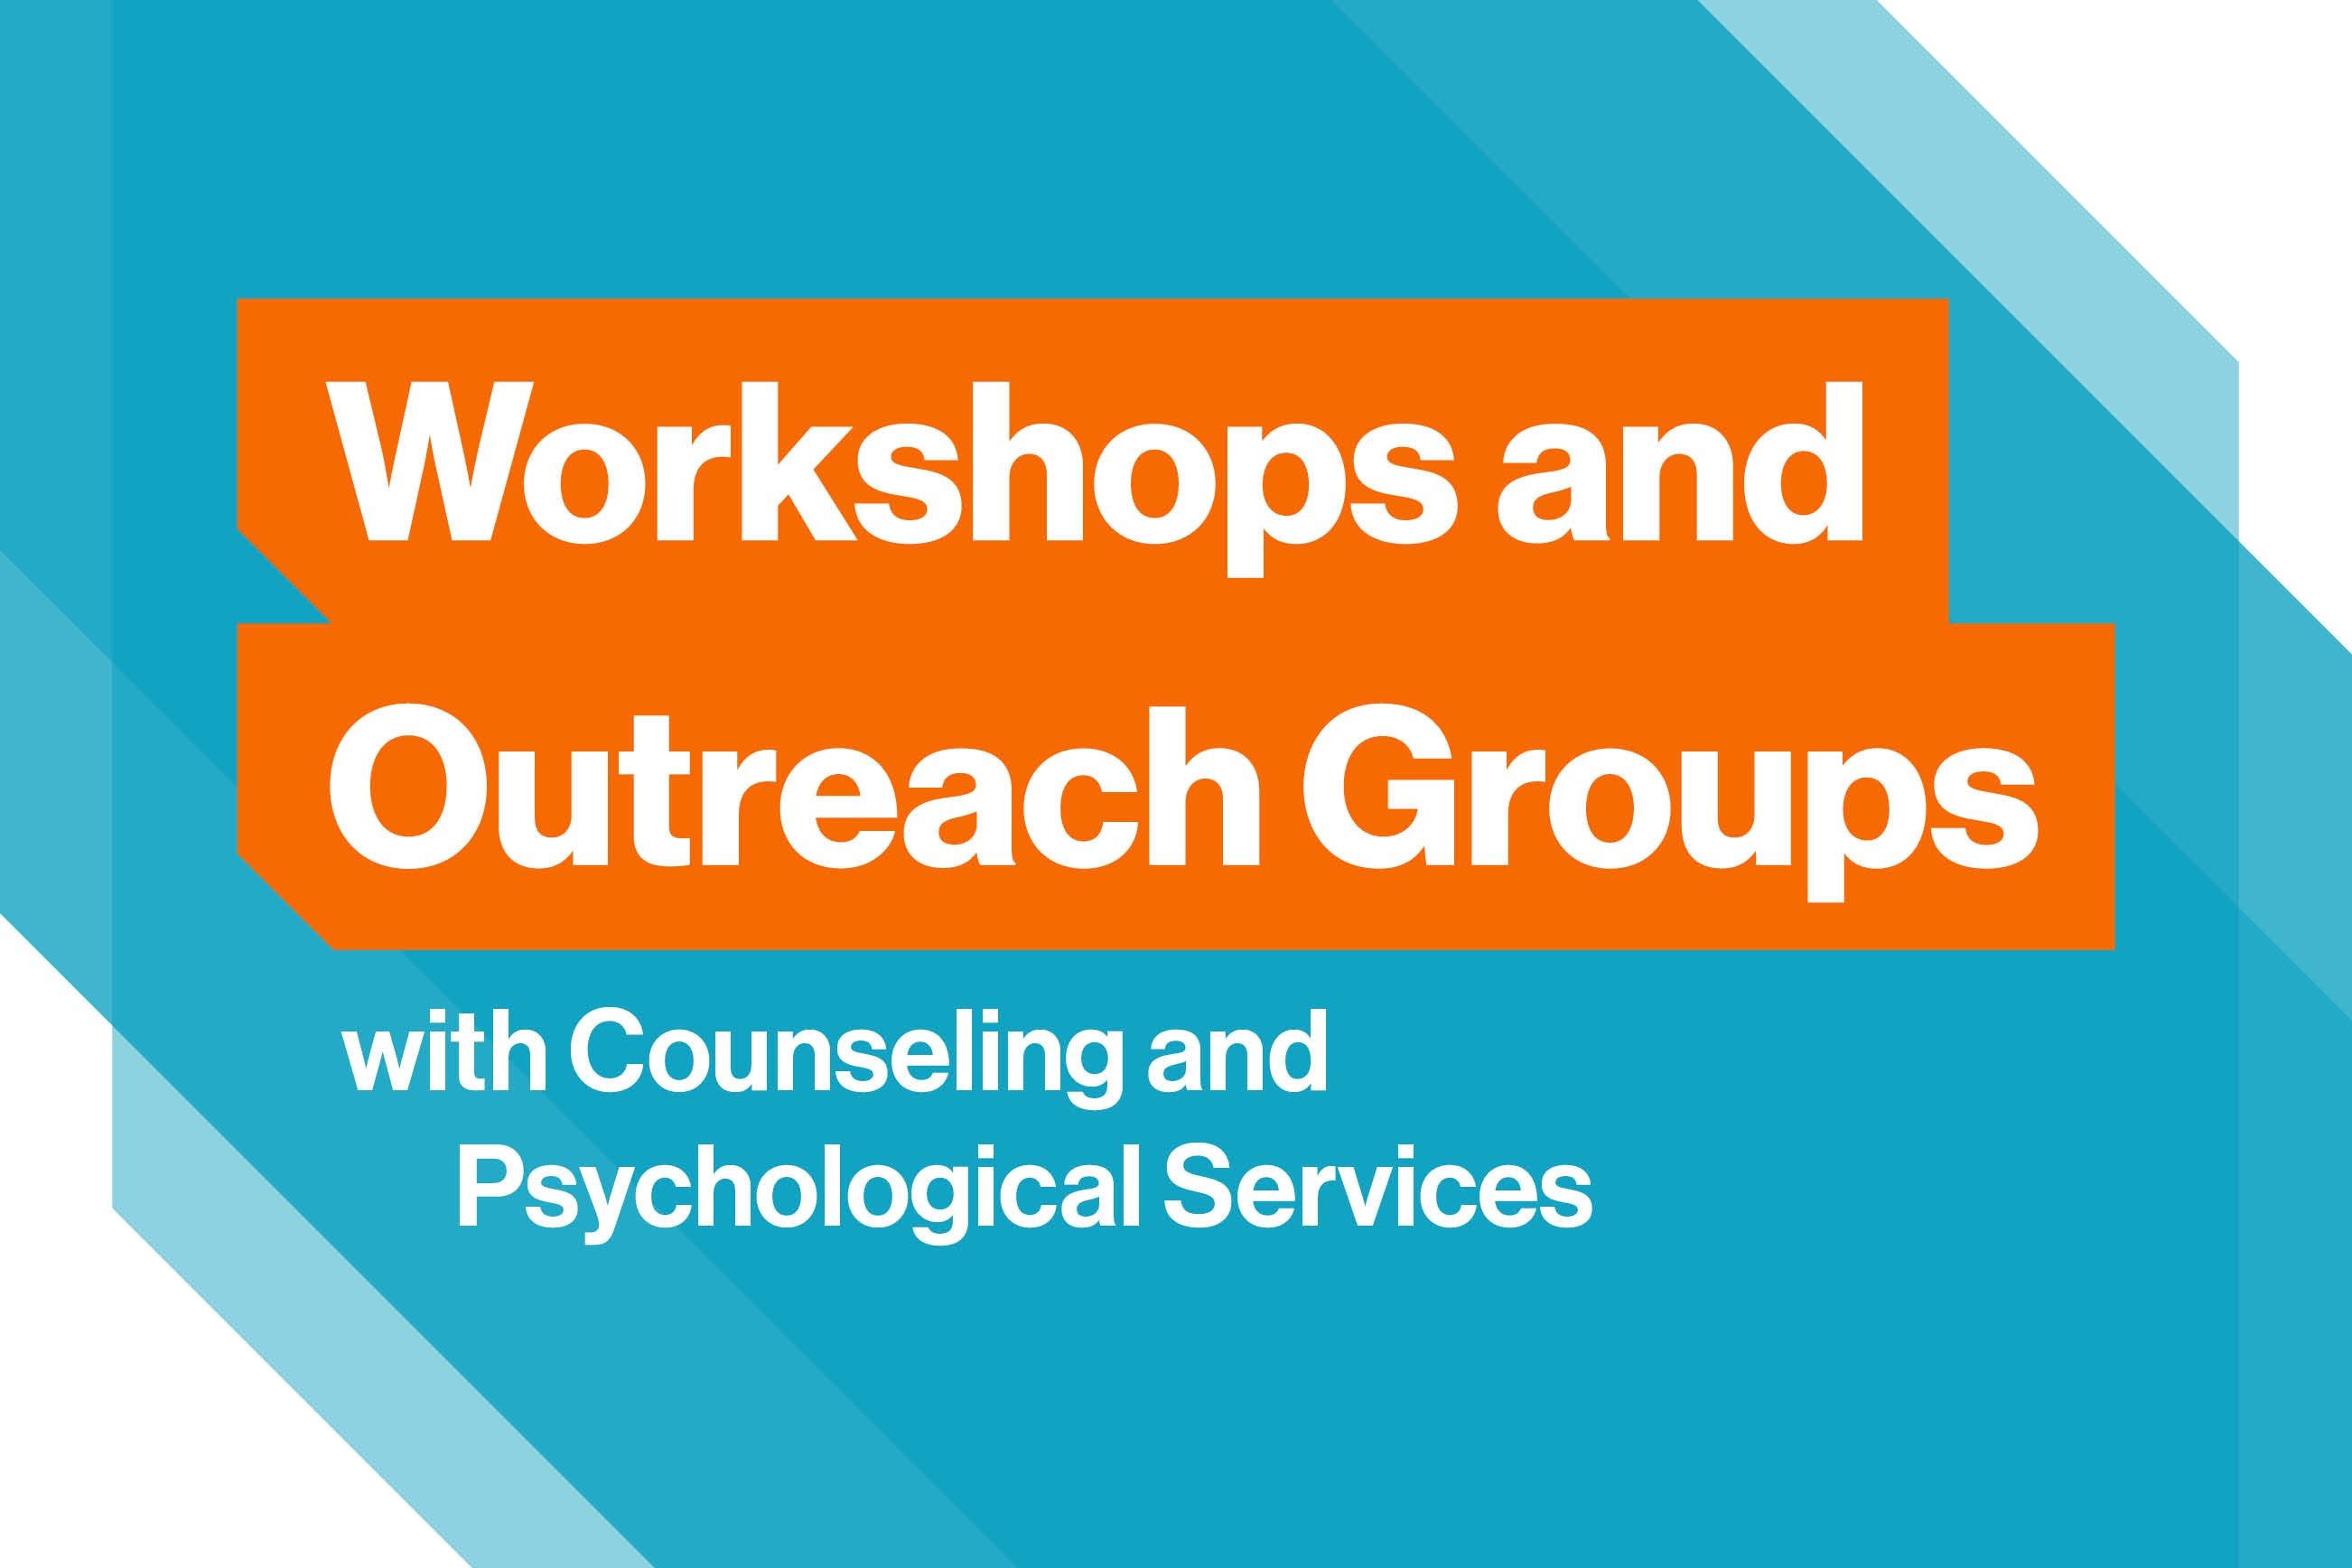 Workshops and Outreach Groups with Counseling and Psychological Services